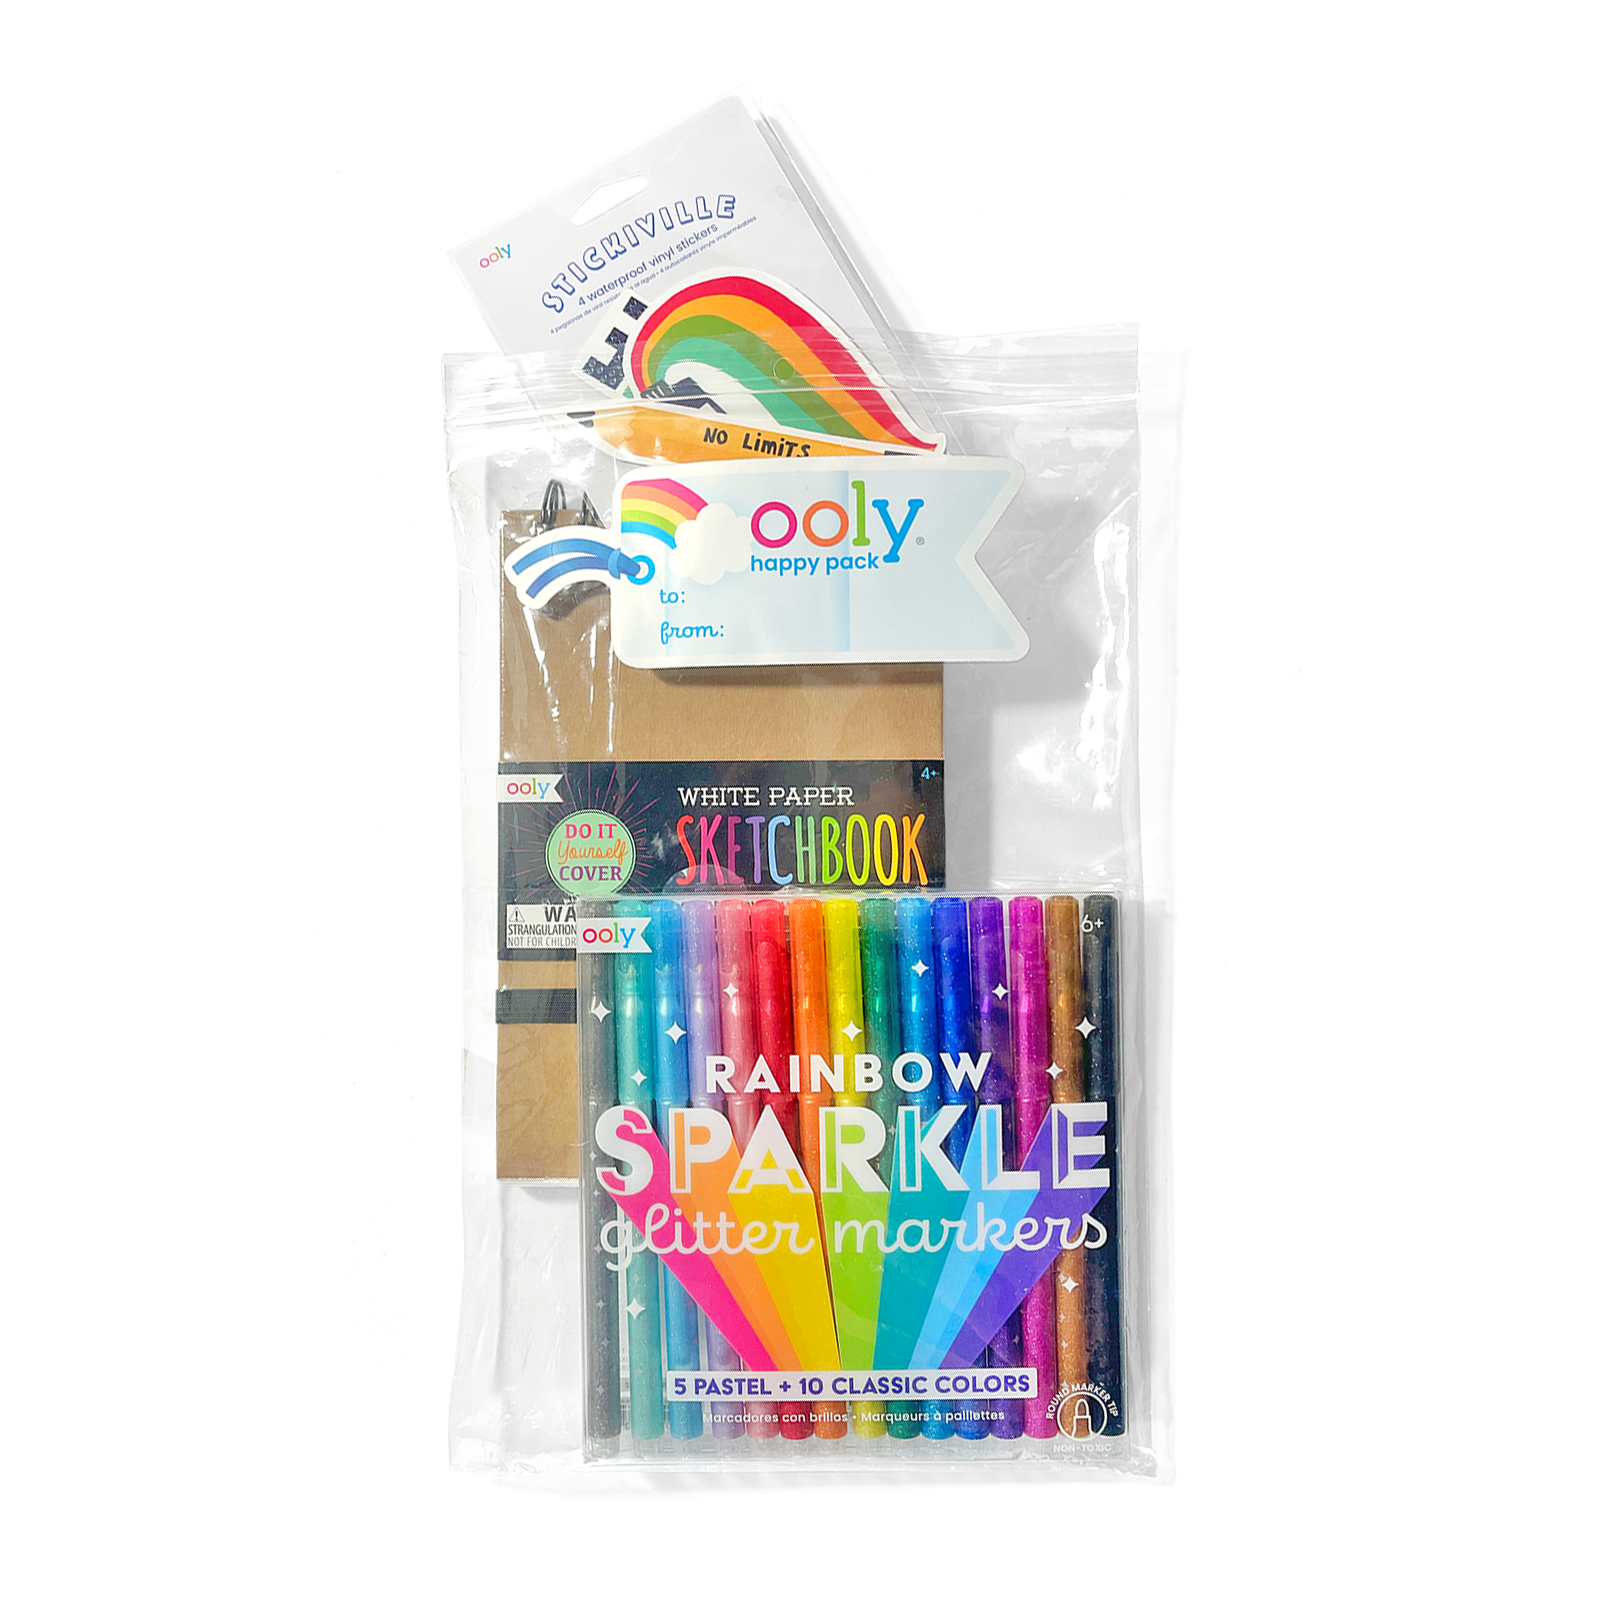 OOLY Holiday Gift Pack markers, stickers and sketchbook in gift packaging